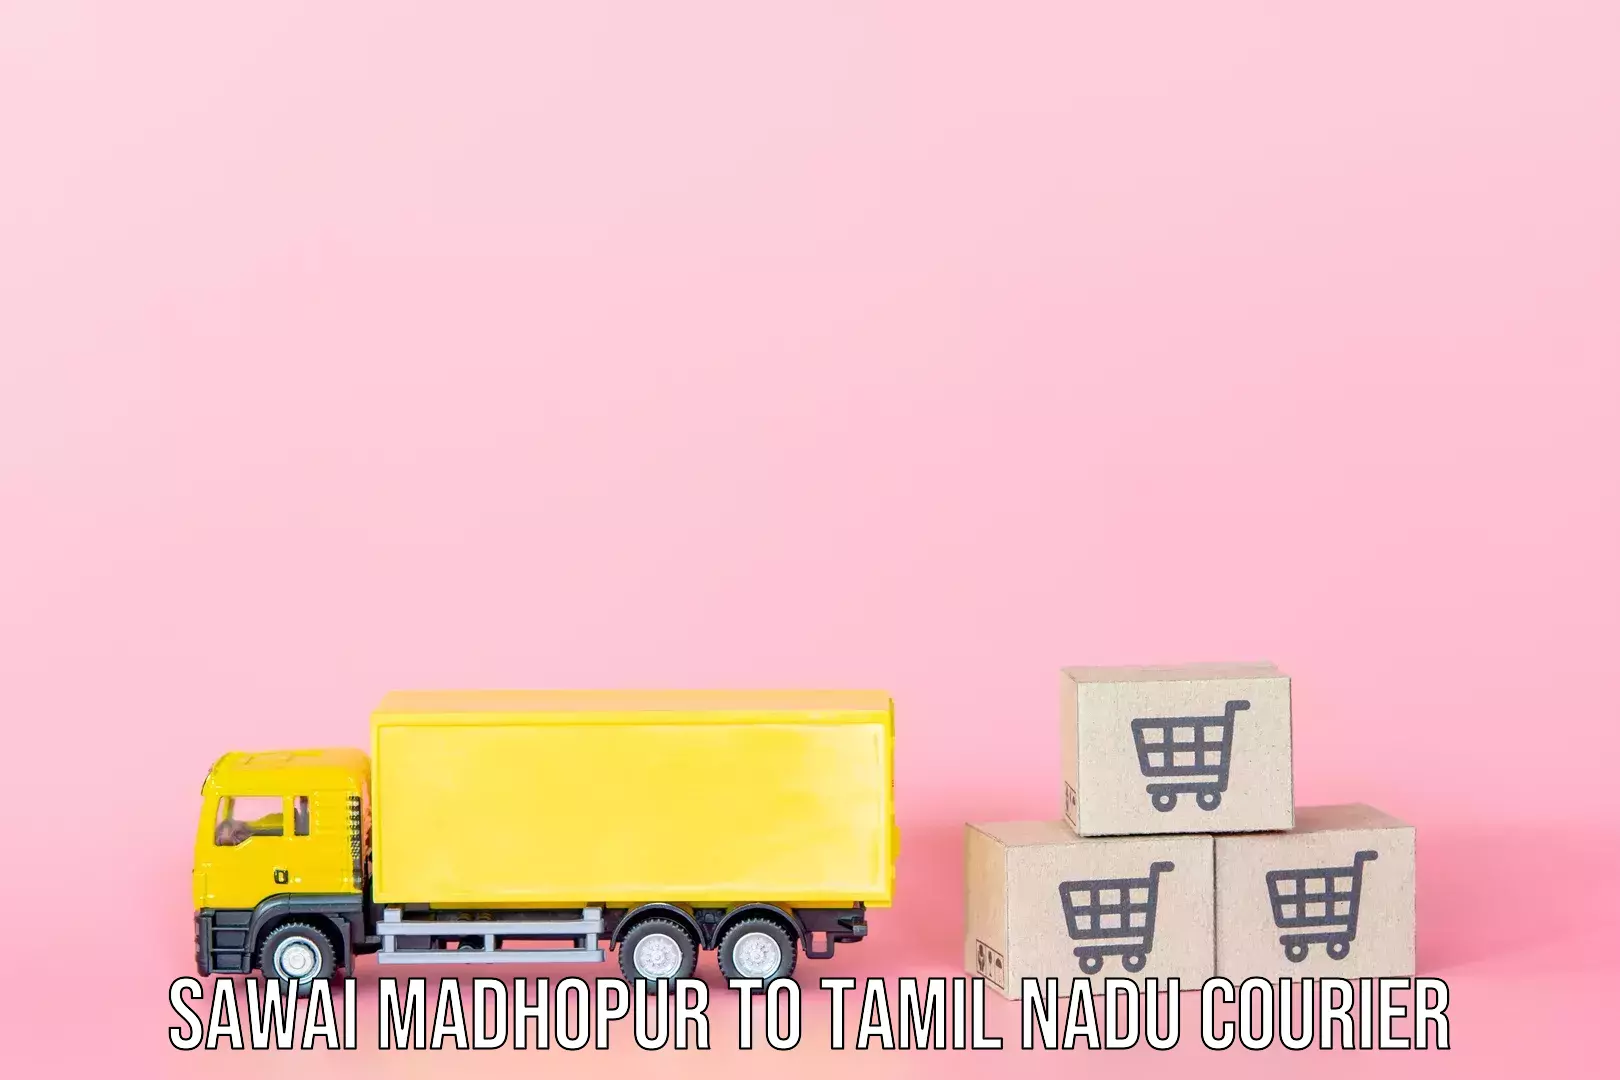 Luggage shipment specialists Sawai Madhopur to SRM Institute of Science and Technology Chennai